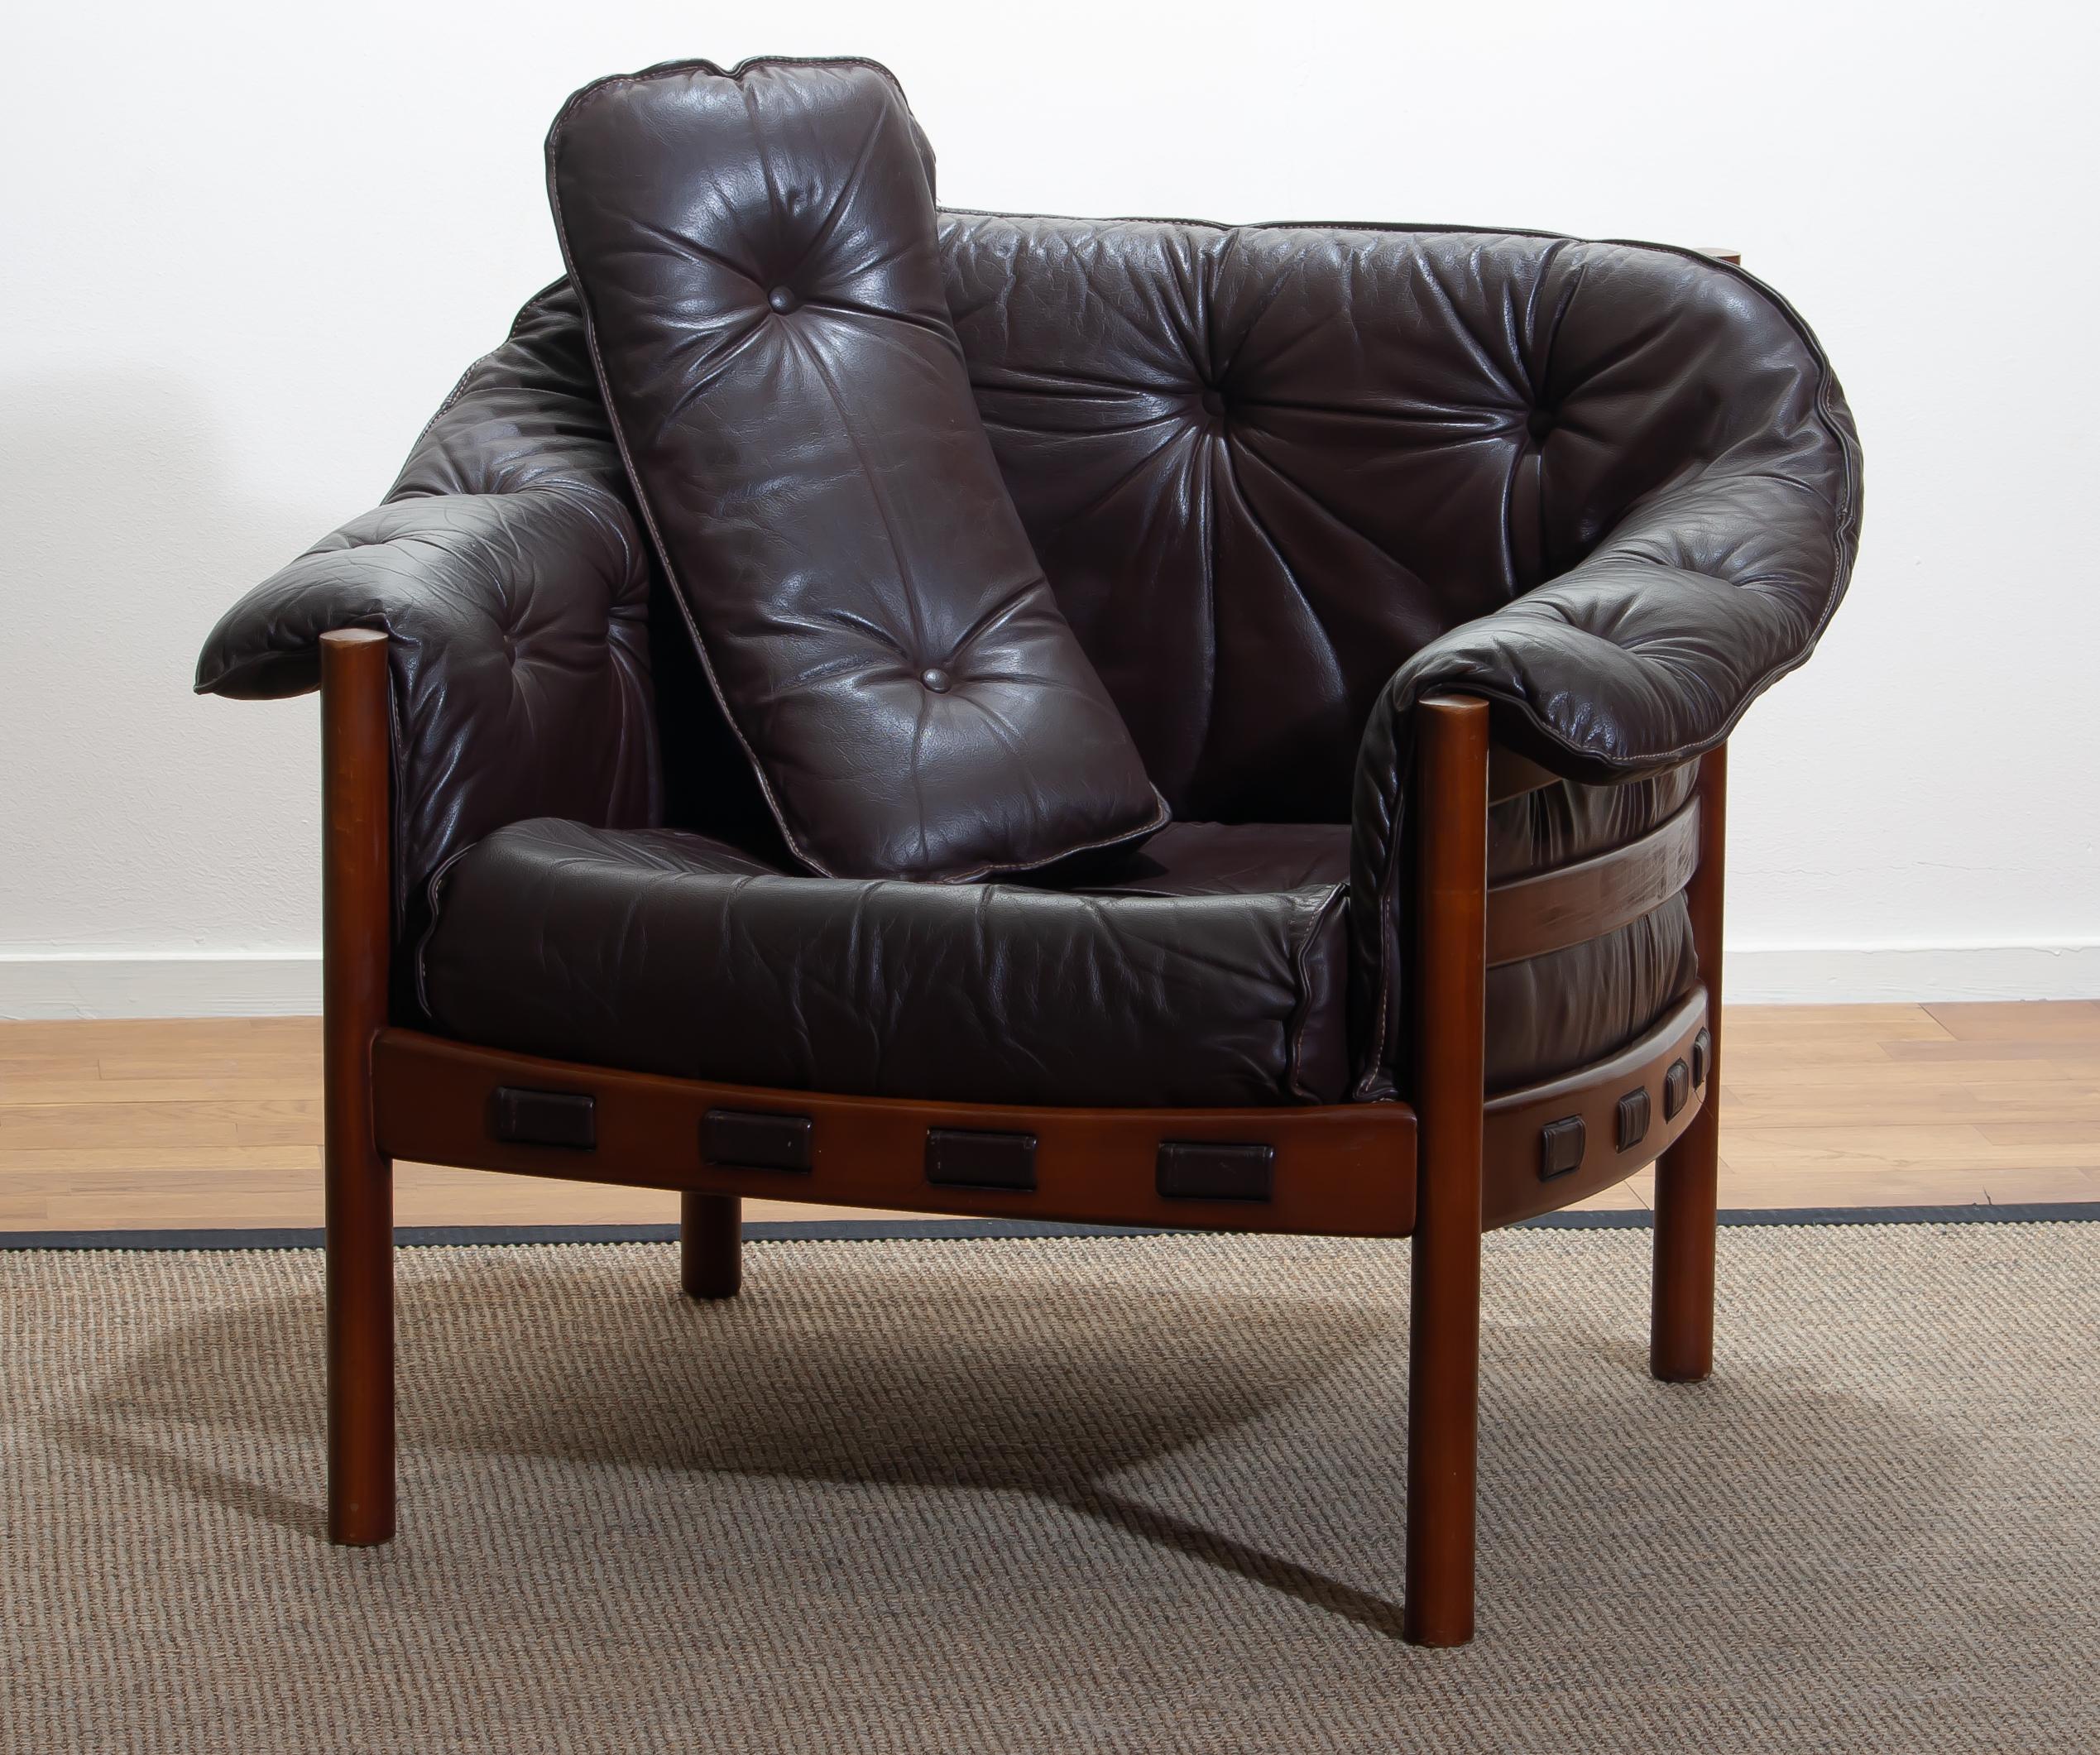 1960, Brown Leather Teak Lounge Chair by Arne Norell for Coja, Sweden 1